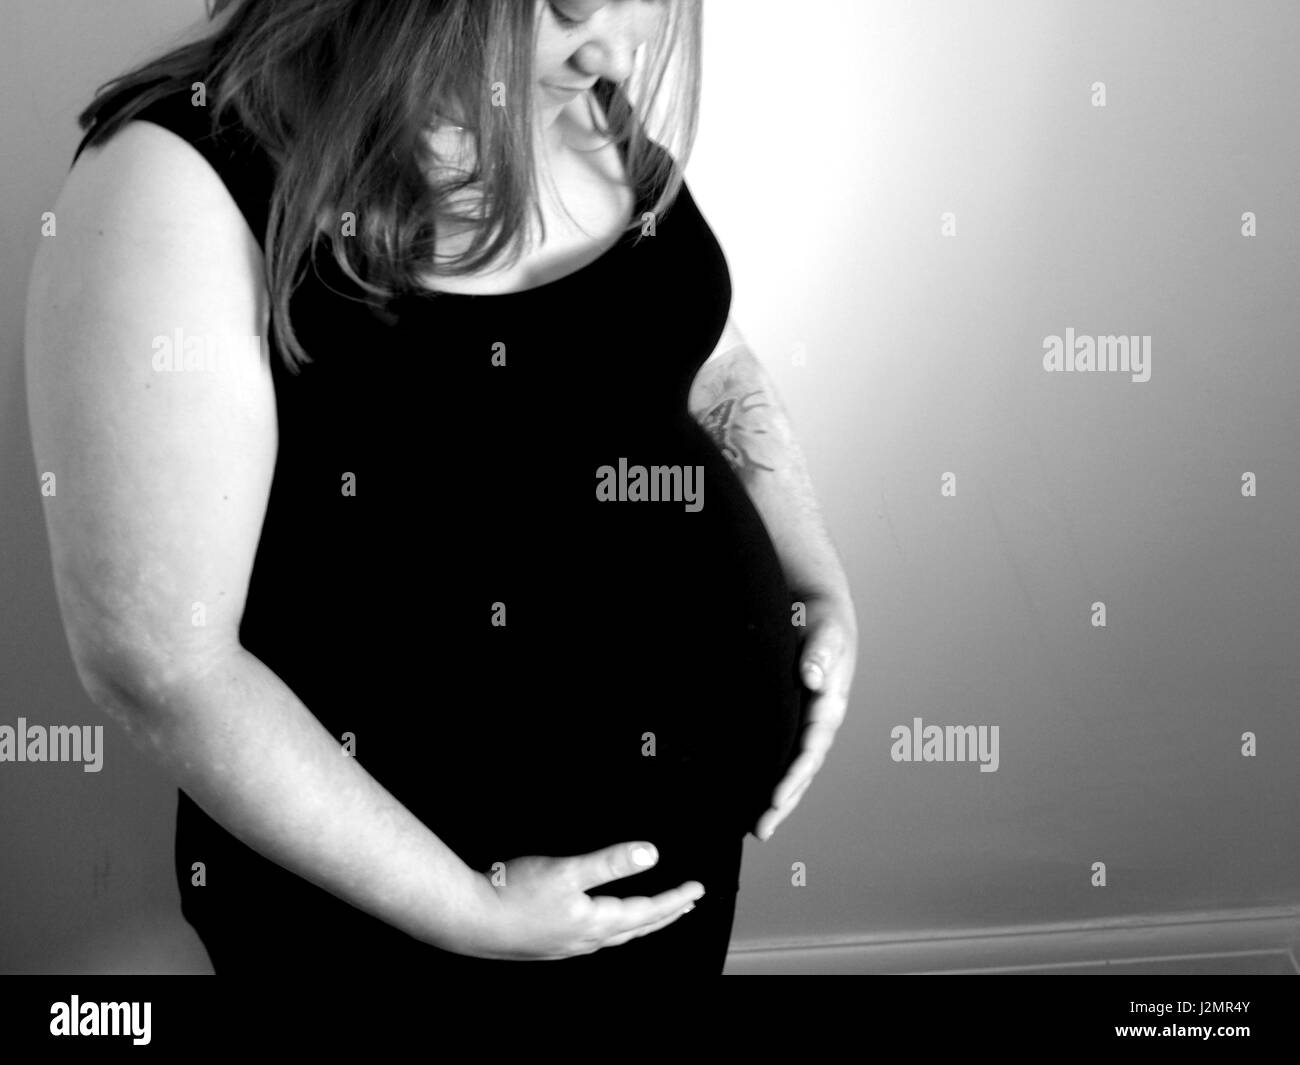 A heavily pregnant woman cradles her unborn child. Stock Photo